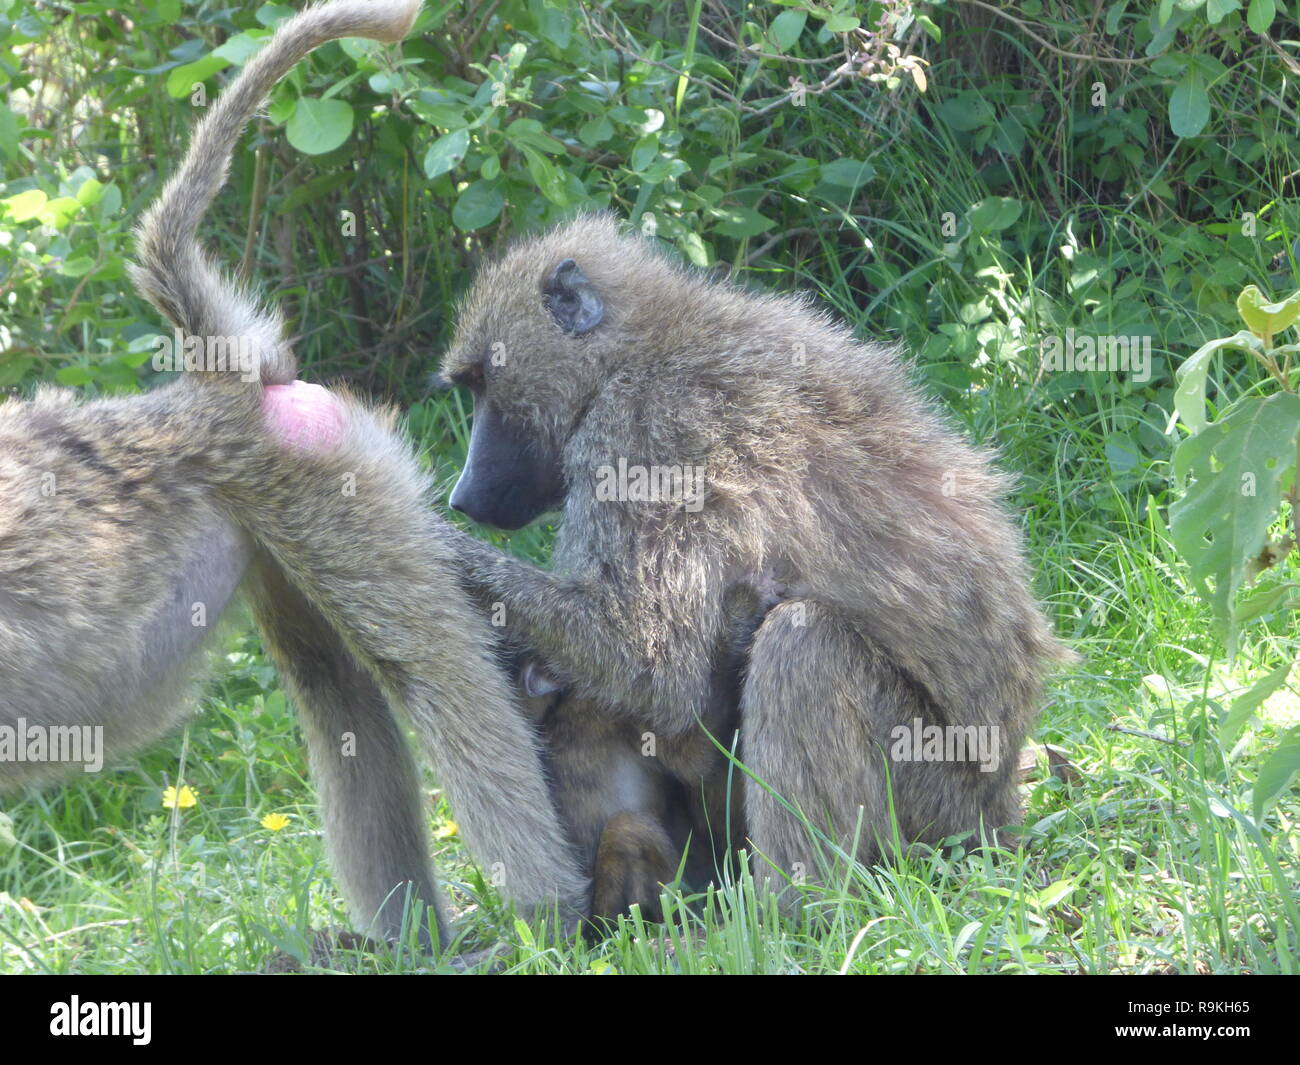 Olive Baboon (Papio anubis), also called the Anubis Baboon grooming each other. Photographed in Arusha National Park, Tanzania, Africa Stock Photo